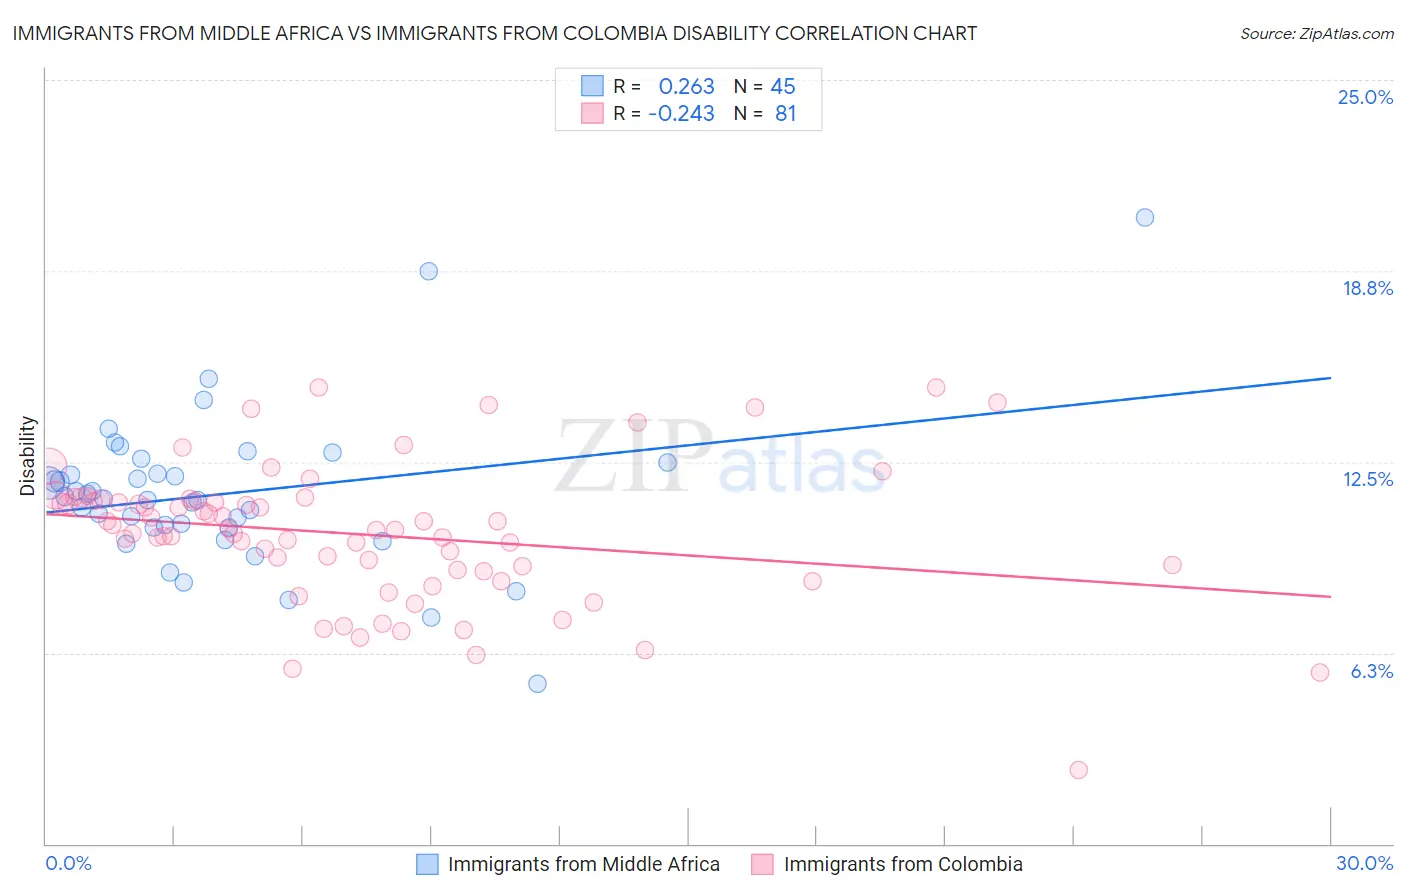 Immigrants from Middle Africa vs Immigrants from Colombia Disability